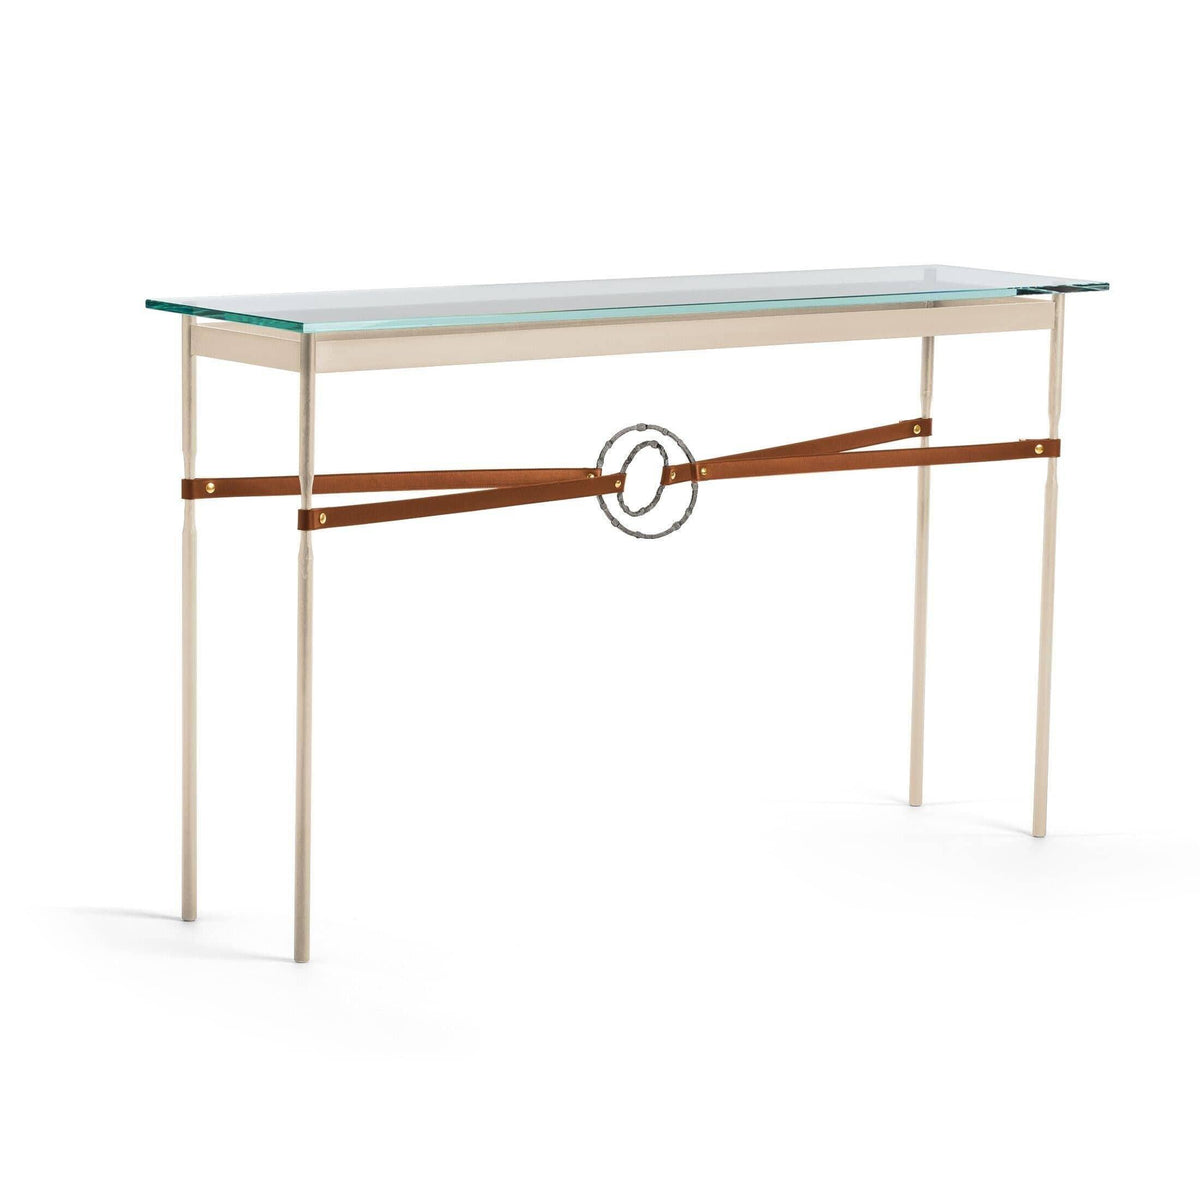 Hubbardton Forge - Equus Chestnut Leather Console Table - 750118-84-20-LC-VA0714 | Montreal Lighting & Hardware